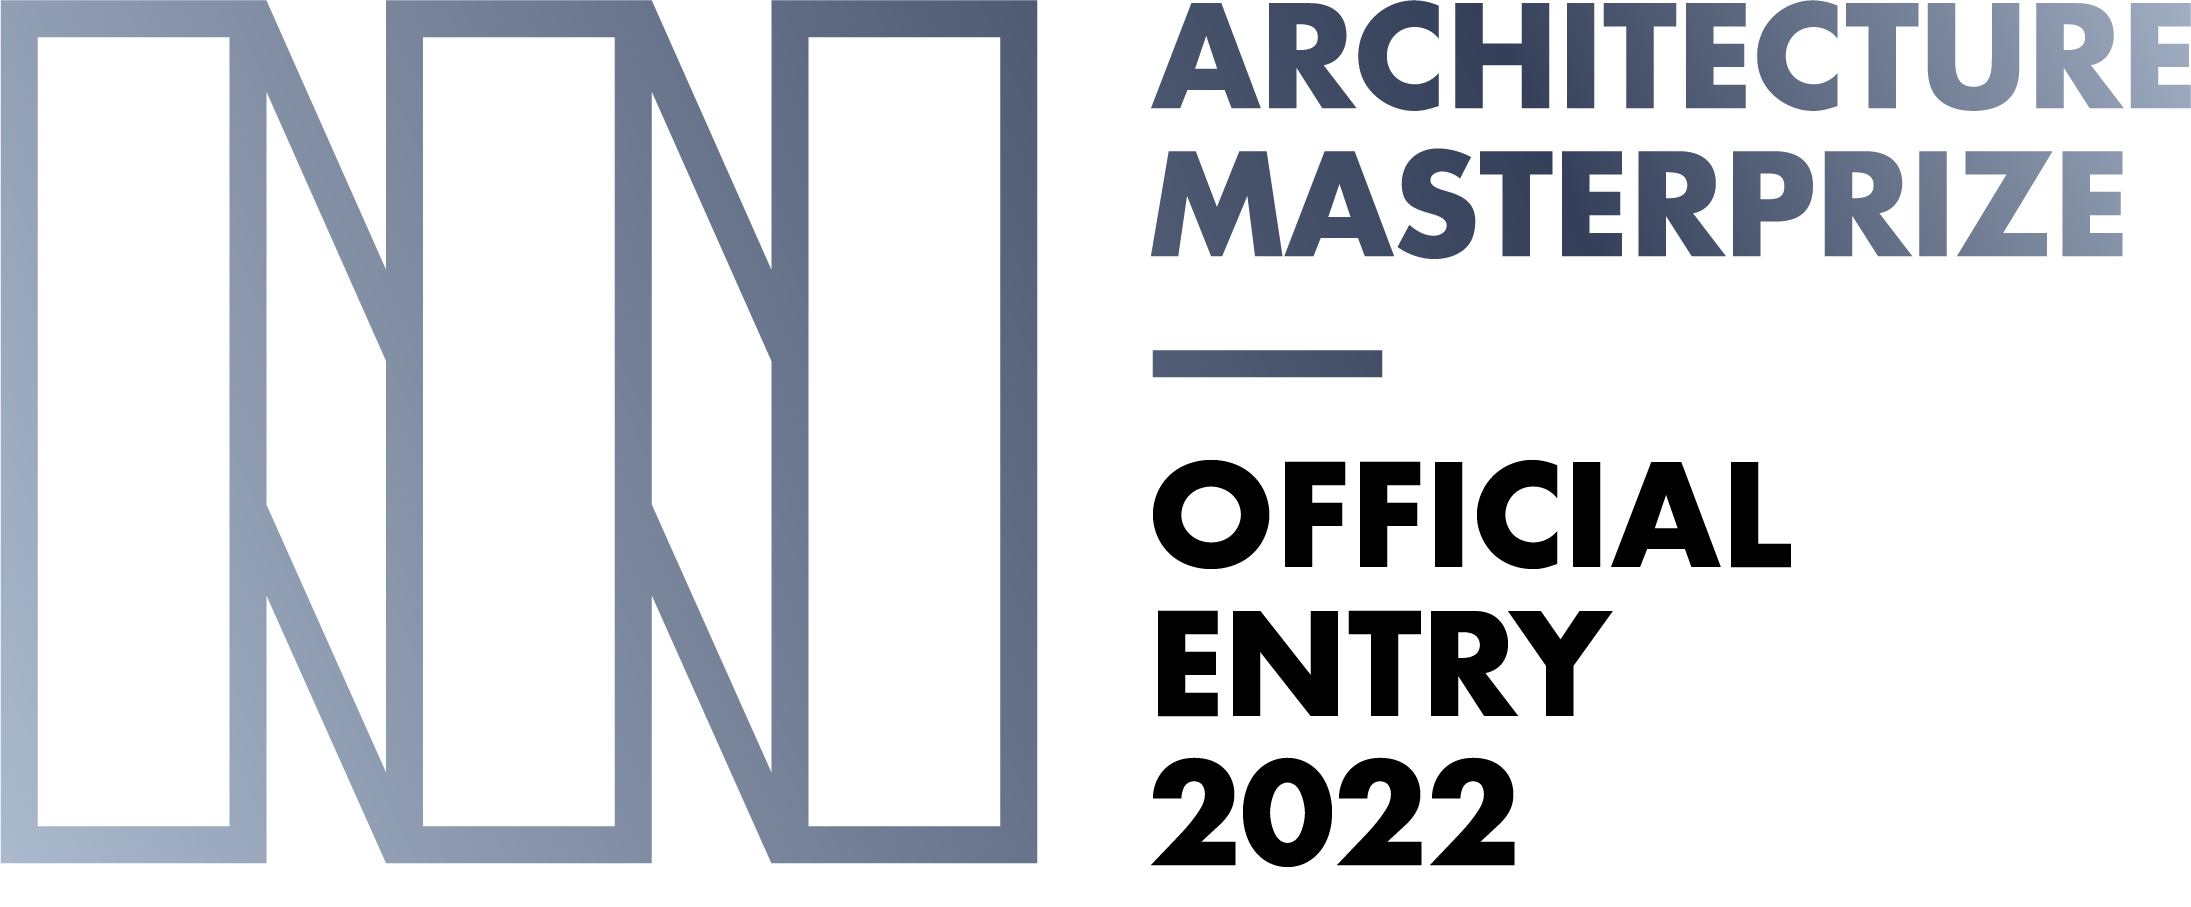 Architecture Masterprize 2022 – Official Entry